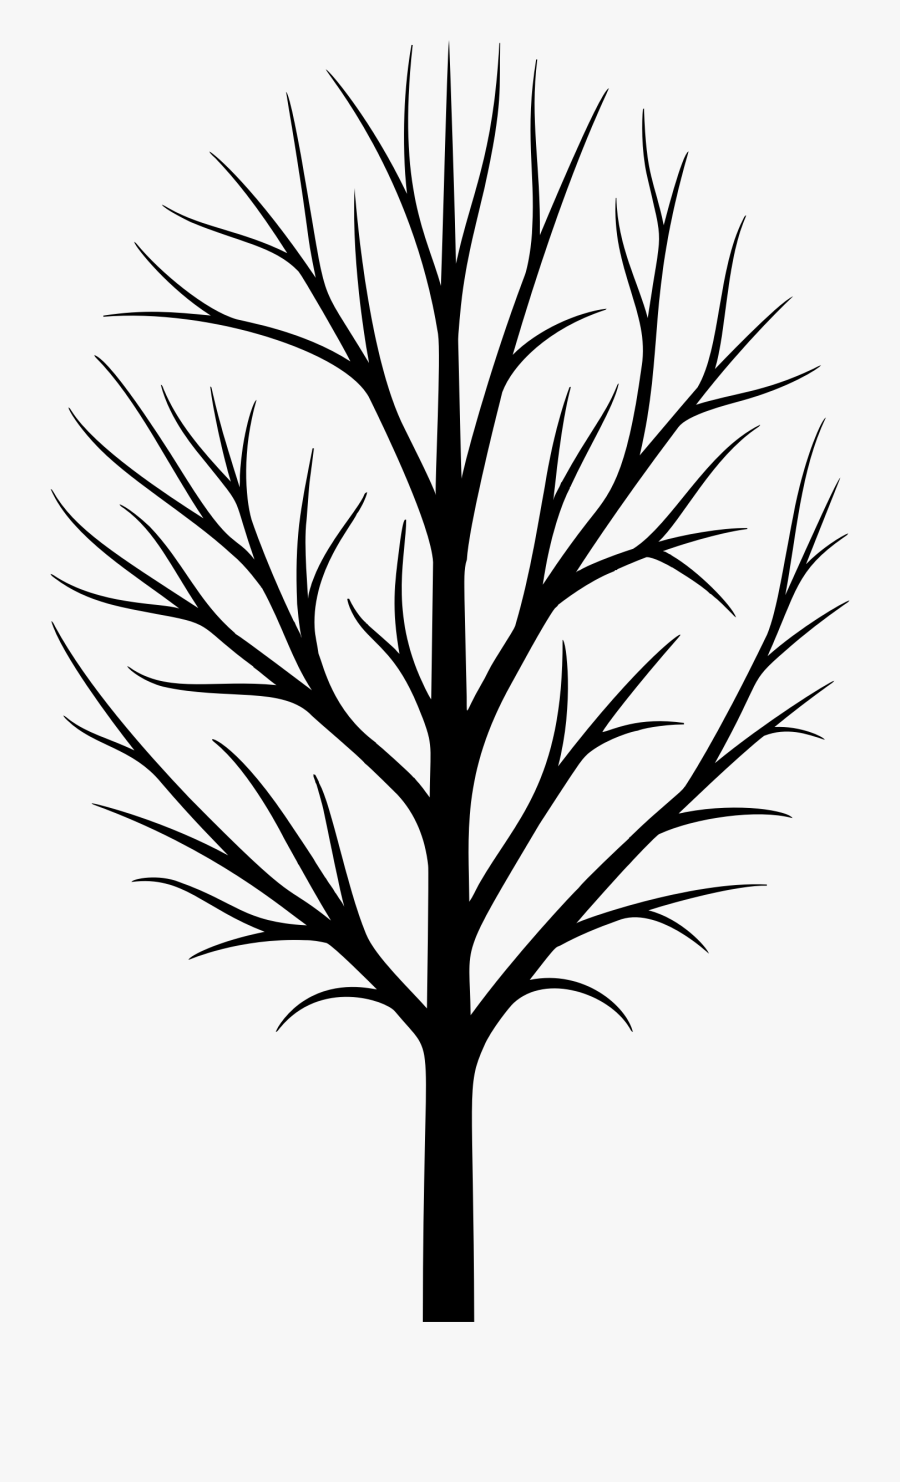 Skinny Tree Silhouette - Fathers Day Tree Printables, Transparent Clipart